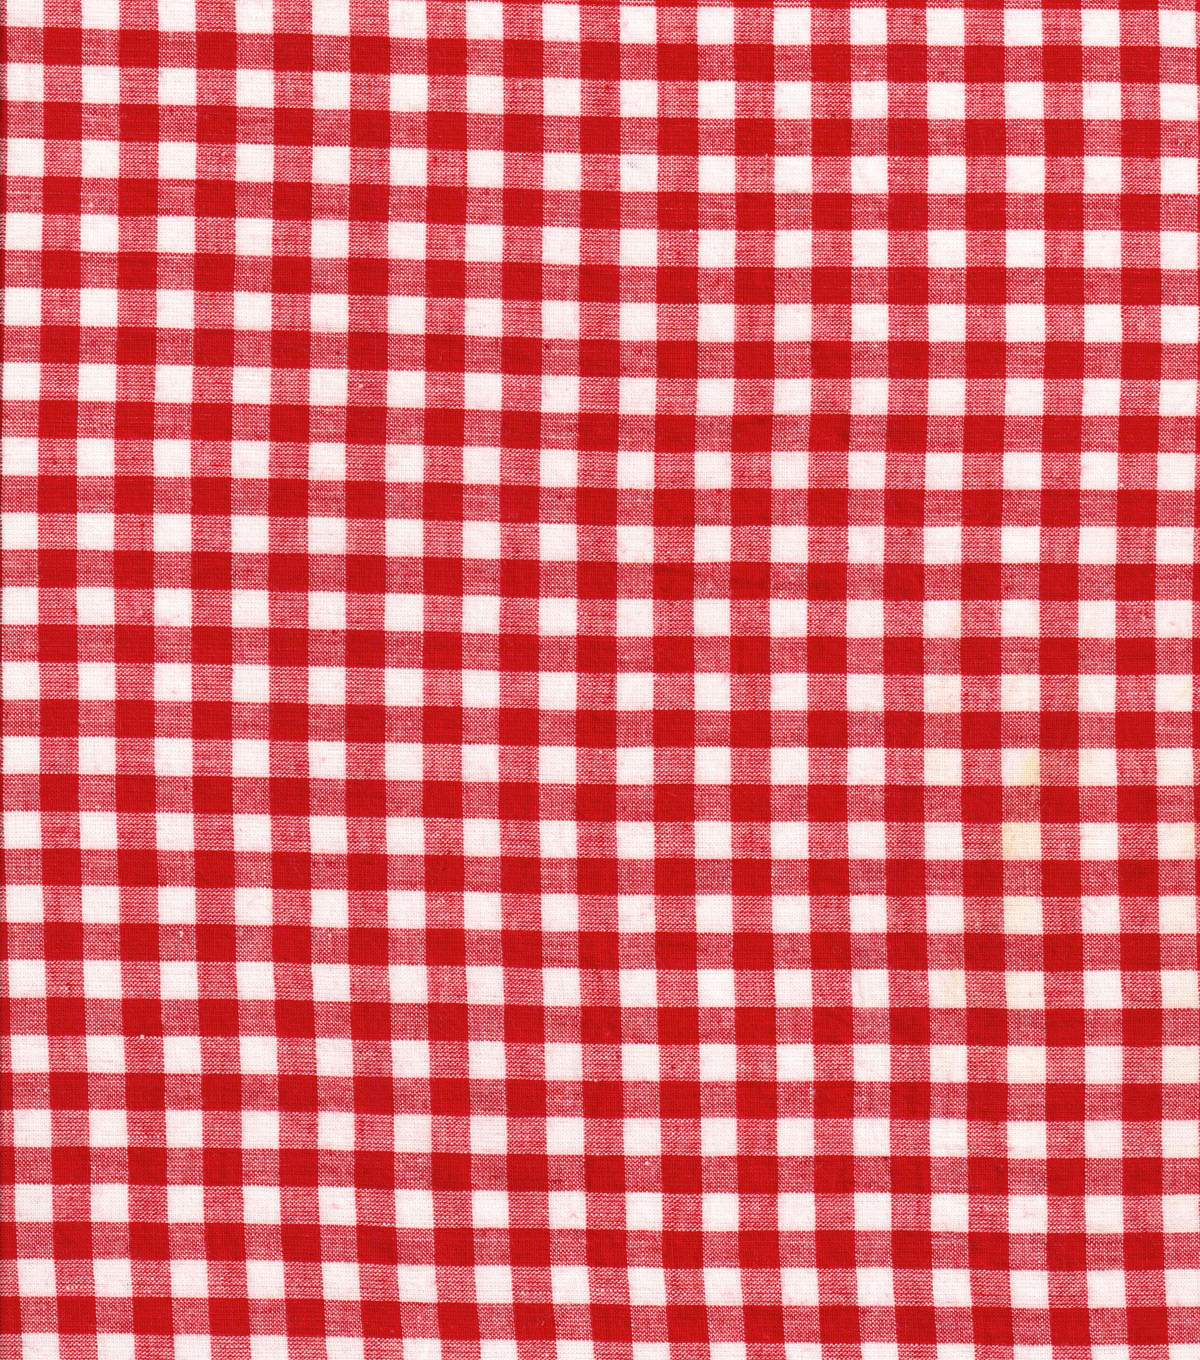 Gingham Embroidery Patterns Free Homespun Cotton Fabric 44 Wide 14 Red Gingham